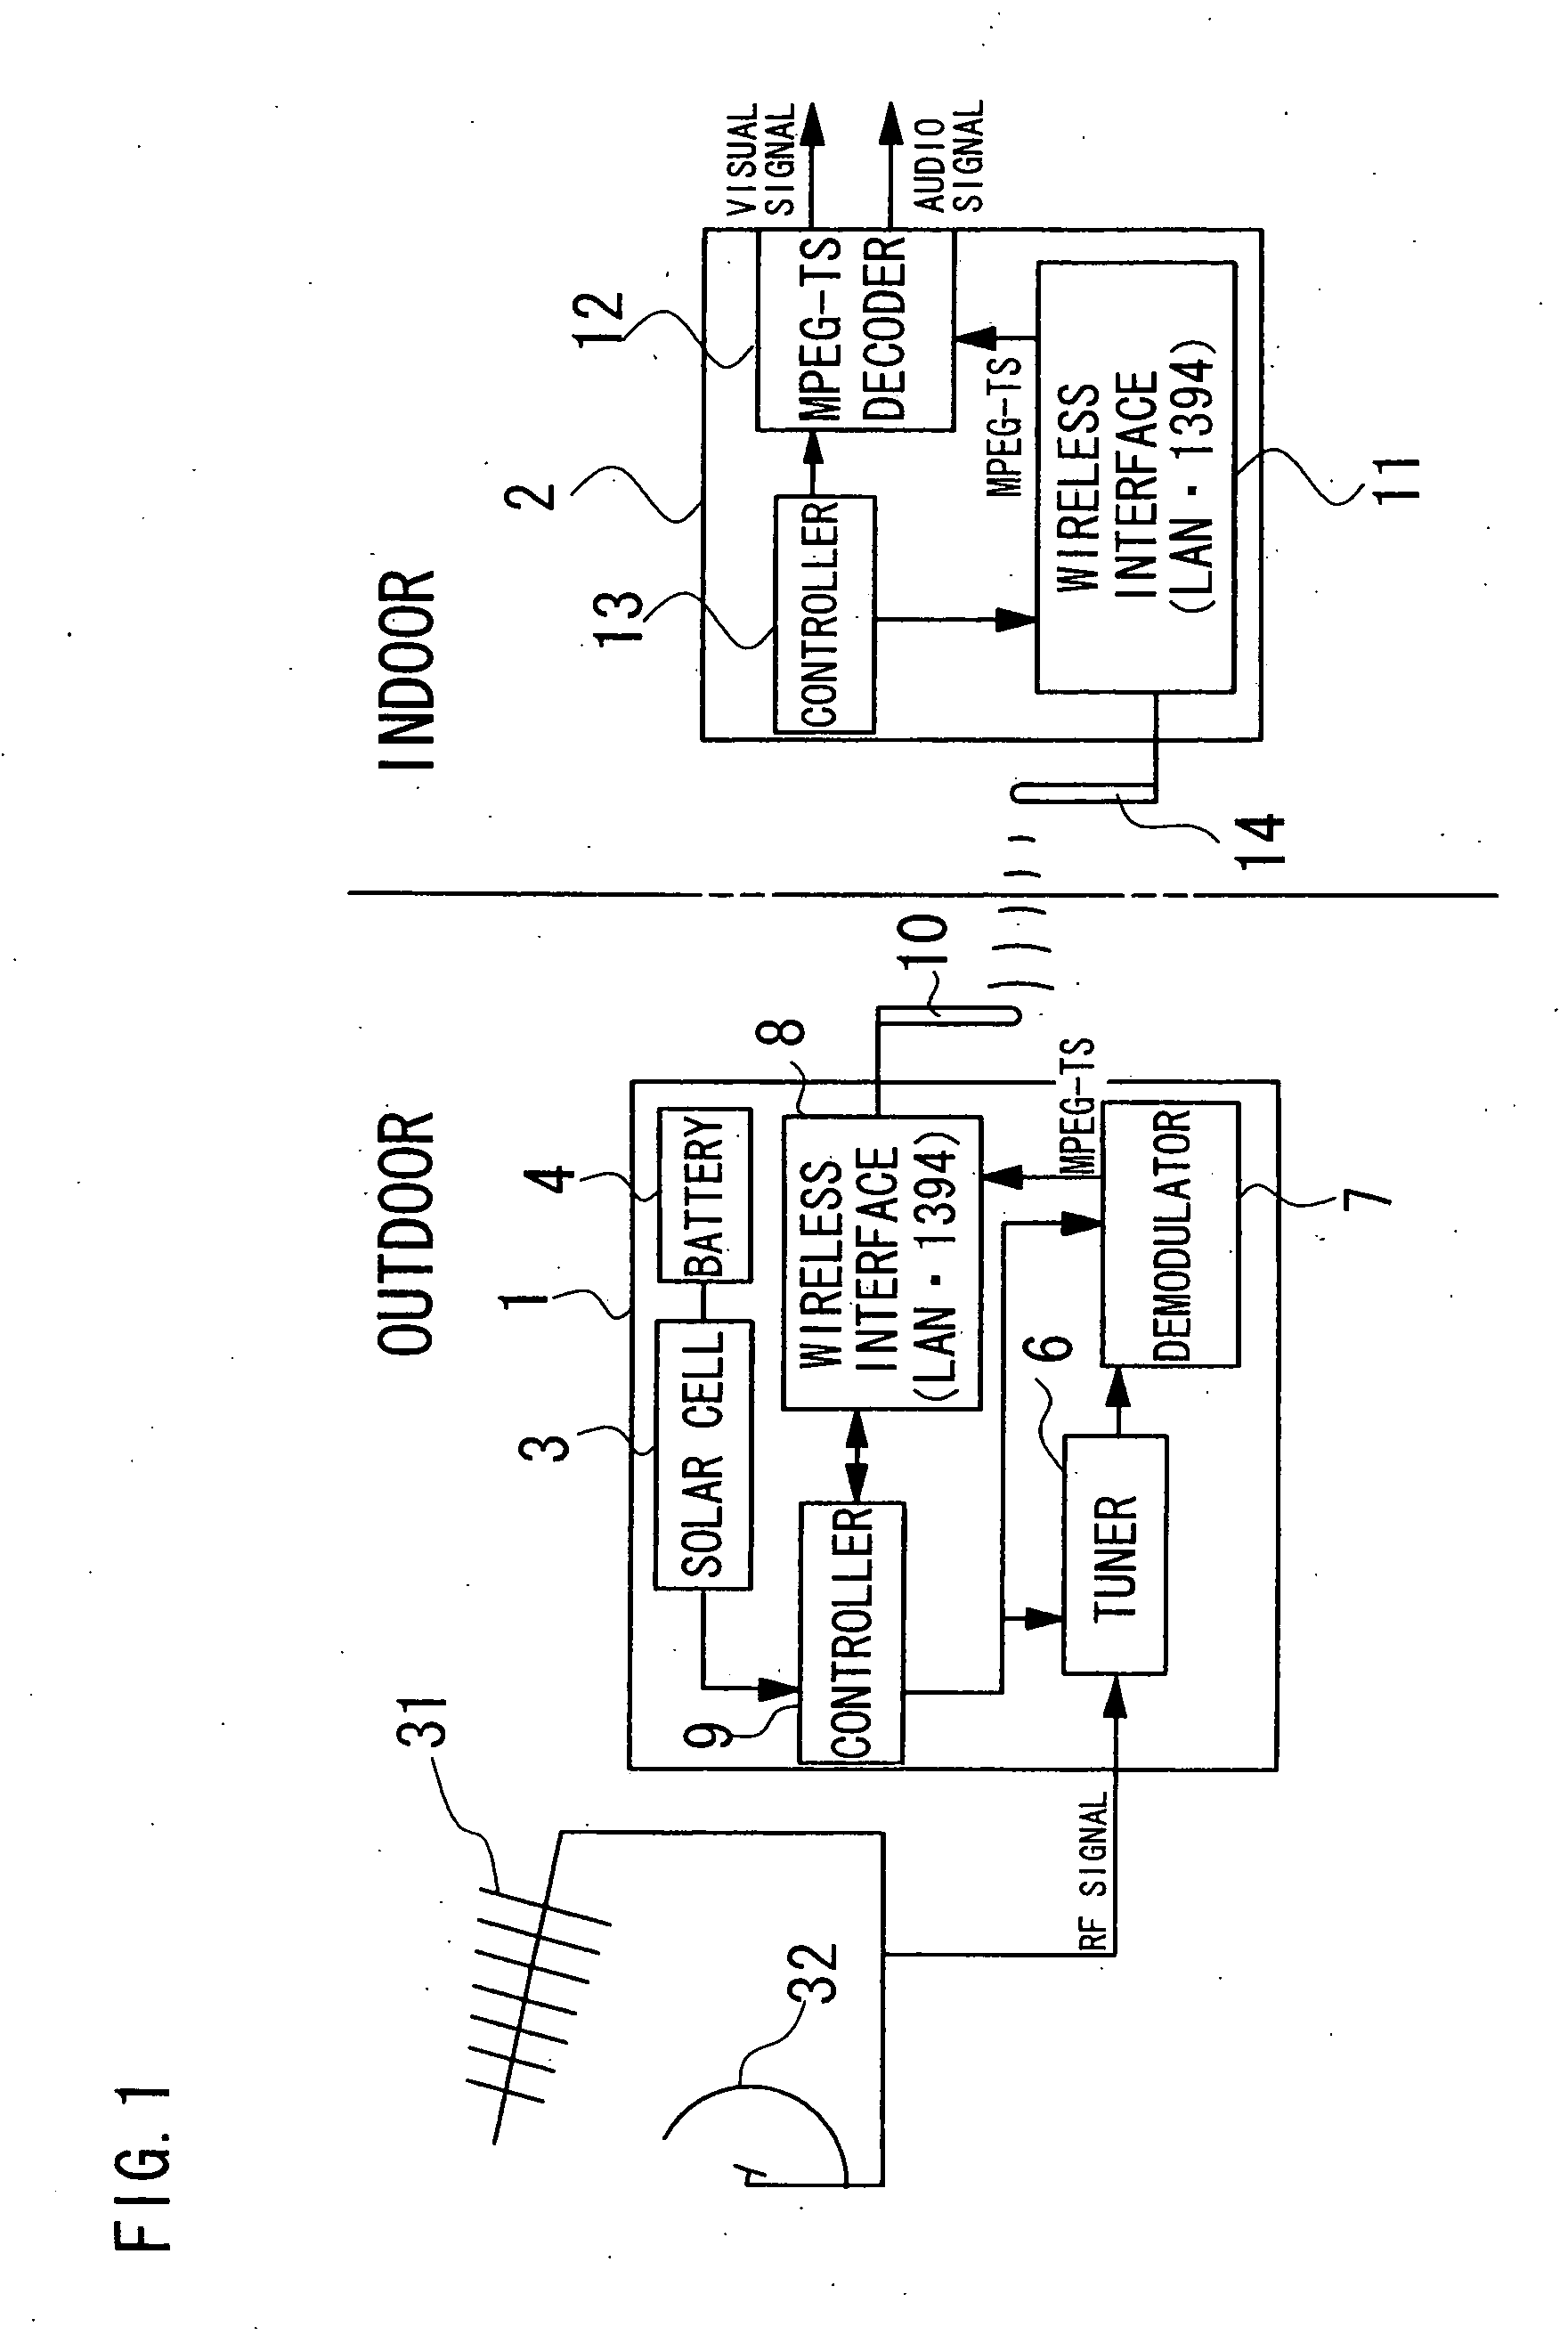 Digital TV broadcast signal receiving system and outdoor appliance used therein